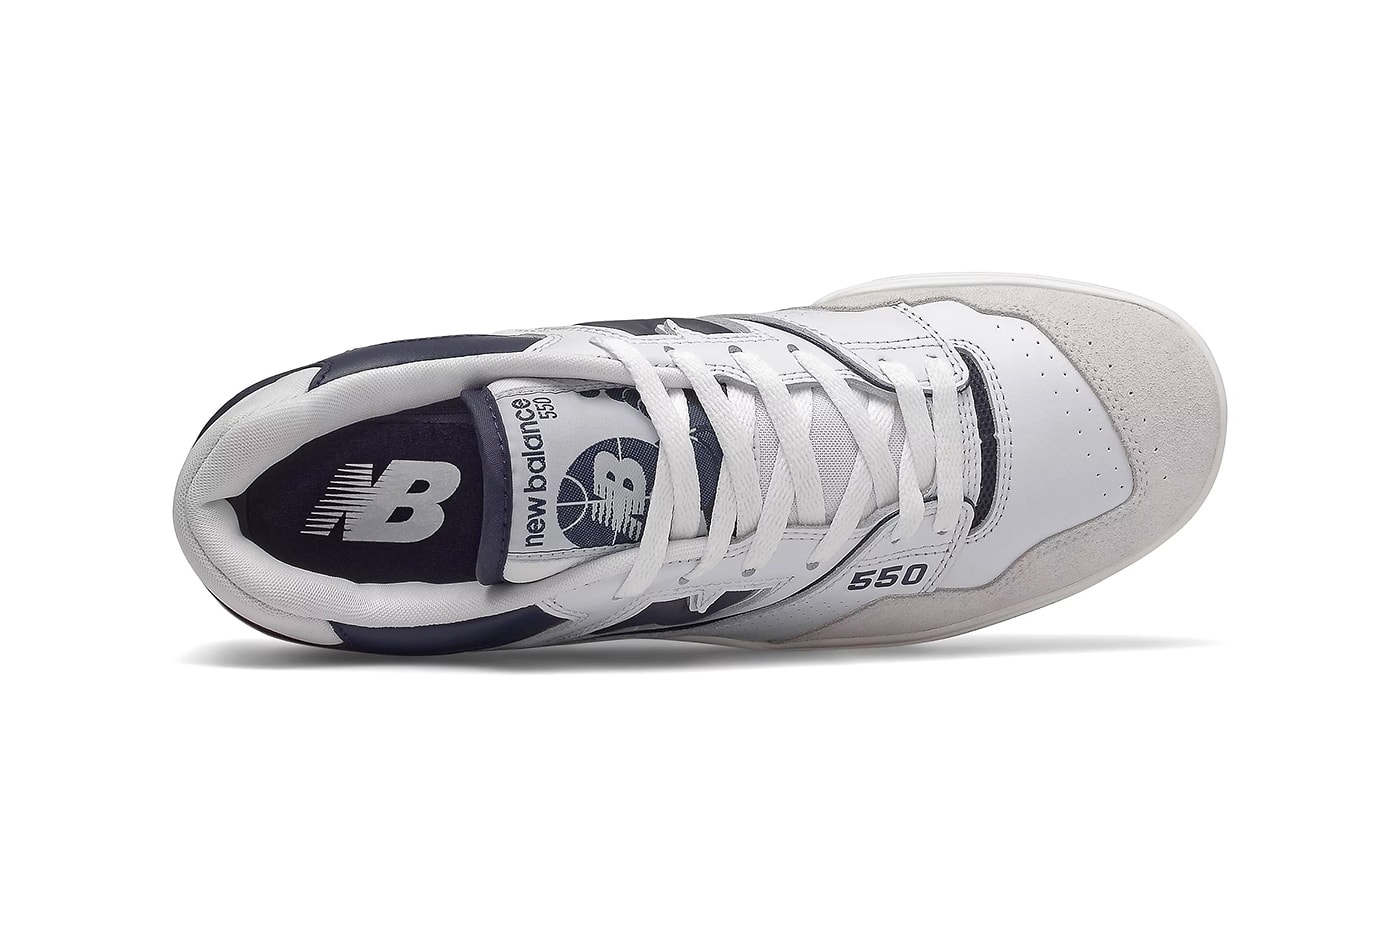 new balance 550 navy and white aime leon dore retro basketball two tone sneakers classic NB suede leather bb550wa1